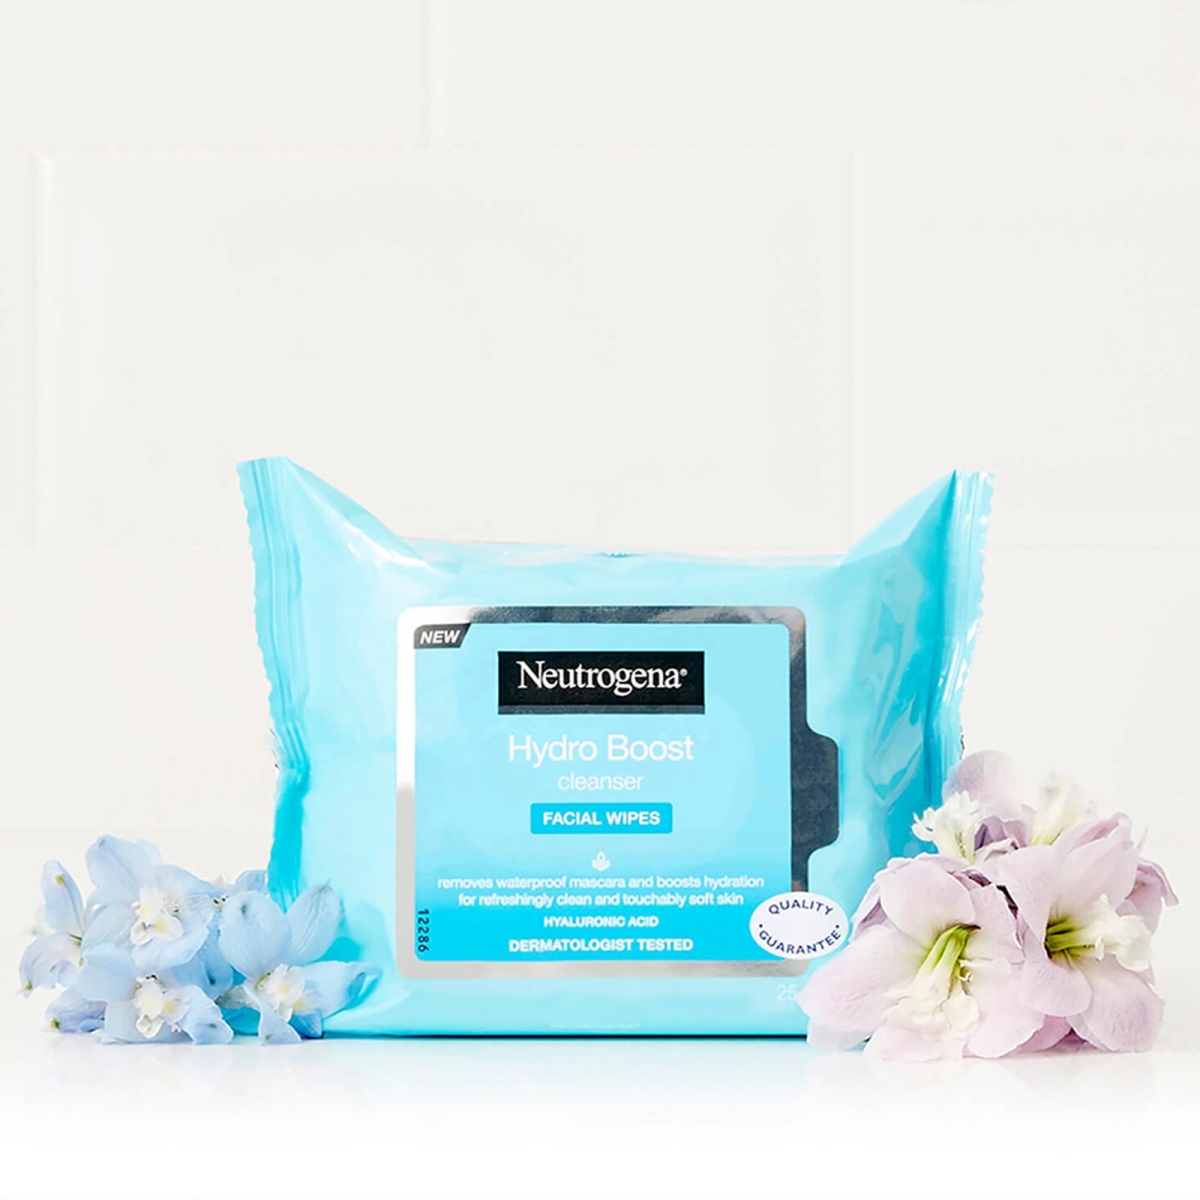 Hydro Boost Cleansing Facial Wipes 